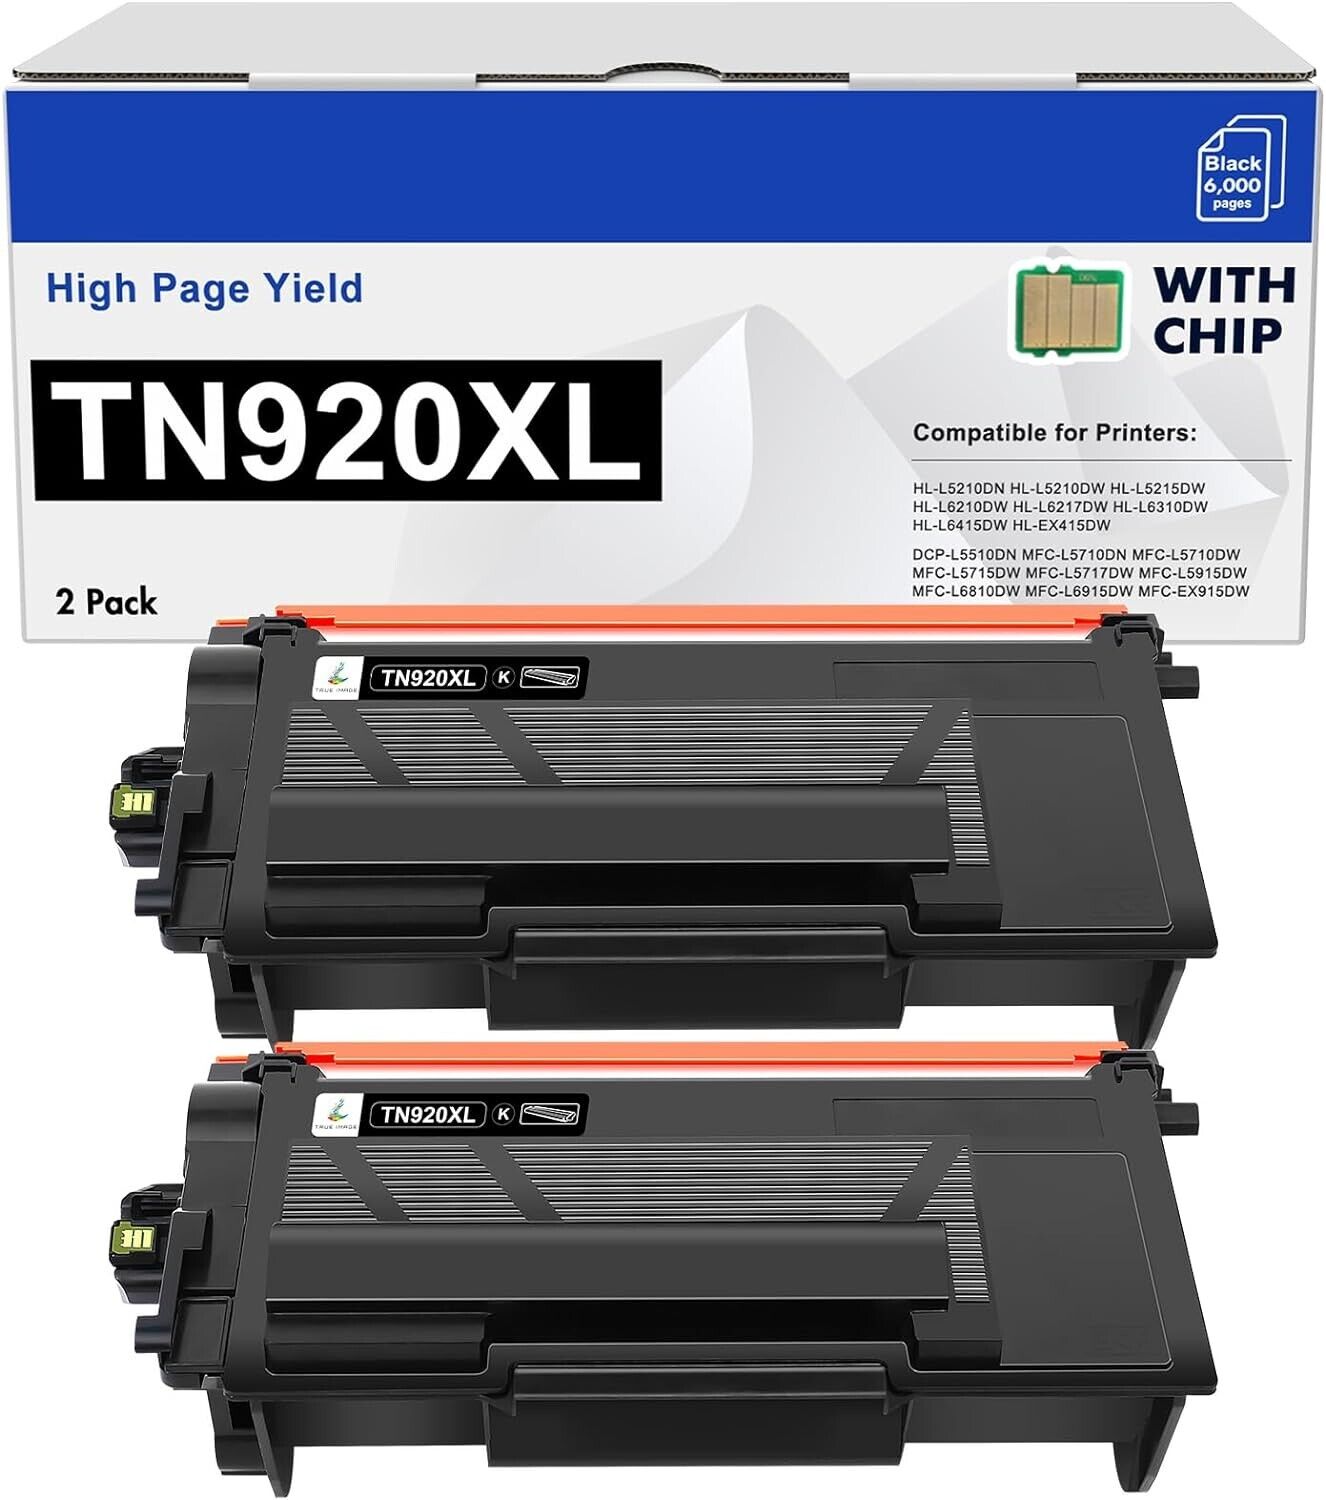 TN920XL TN920 Toner Cartridge Black: with Chip Compatible for Brother